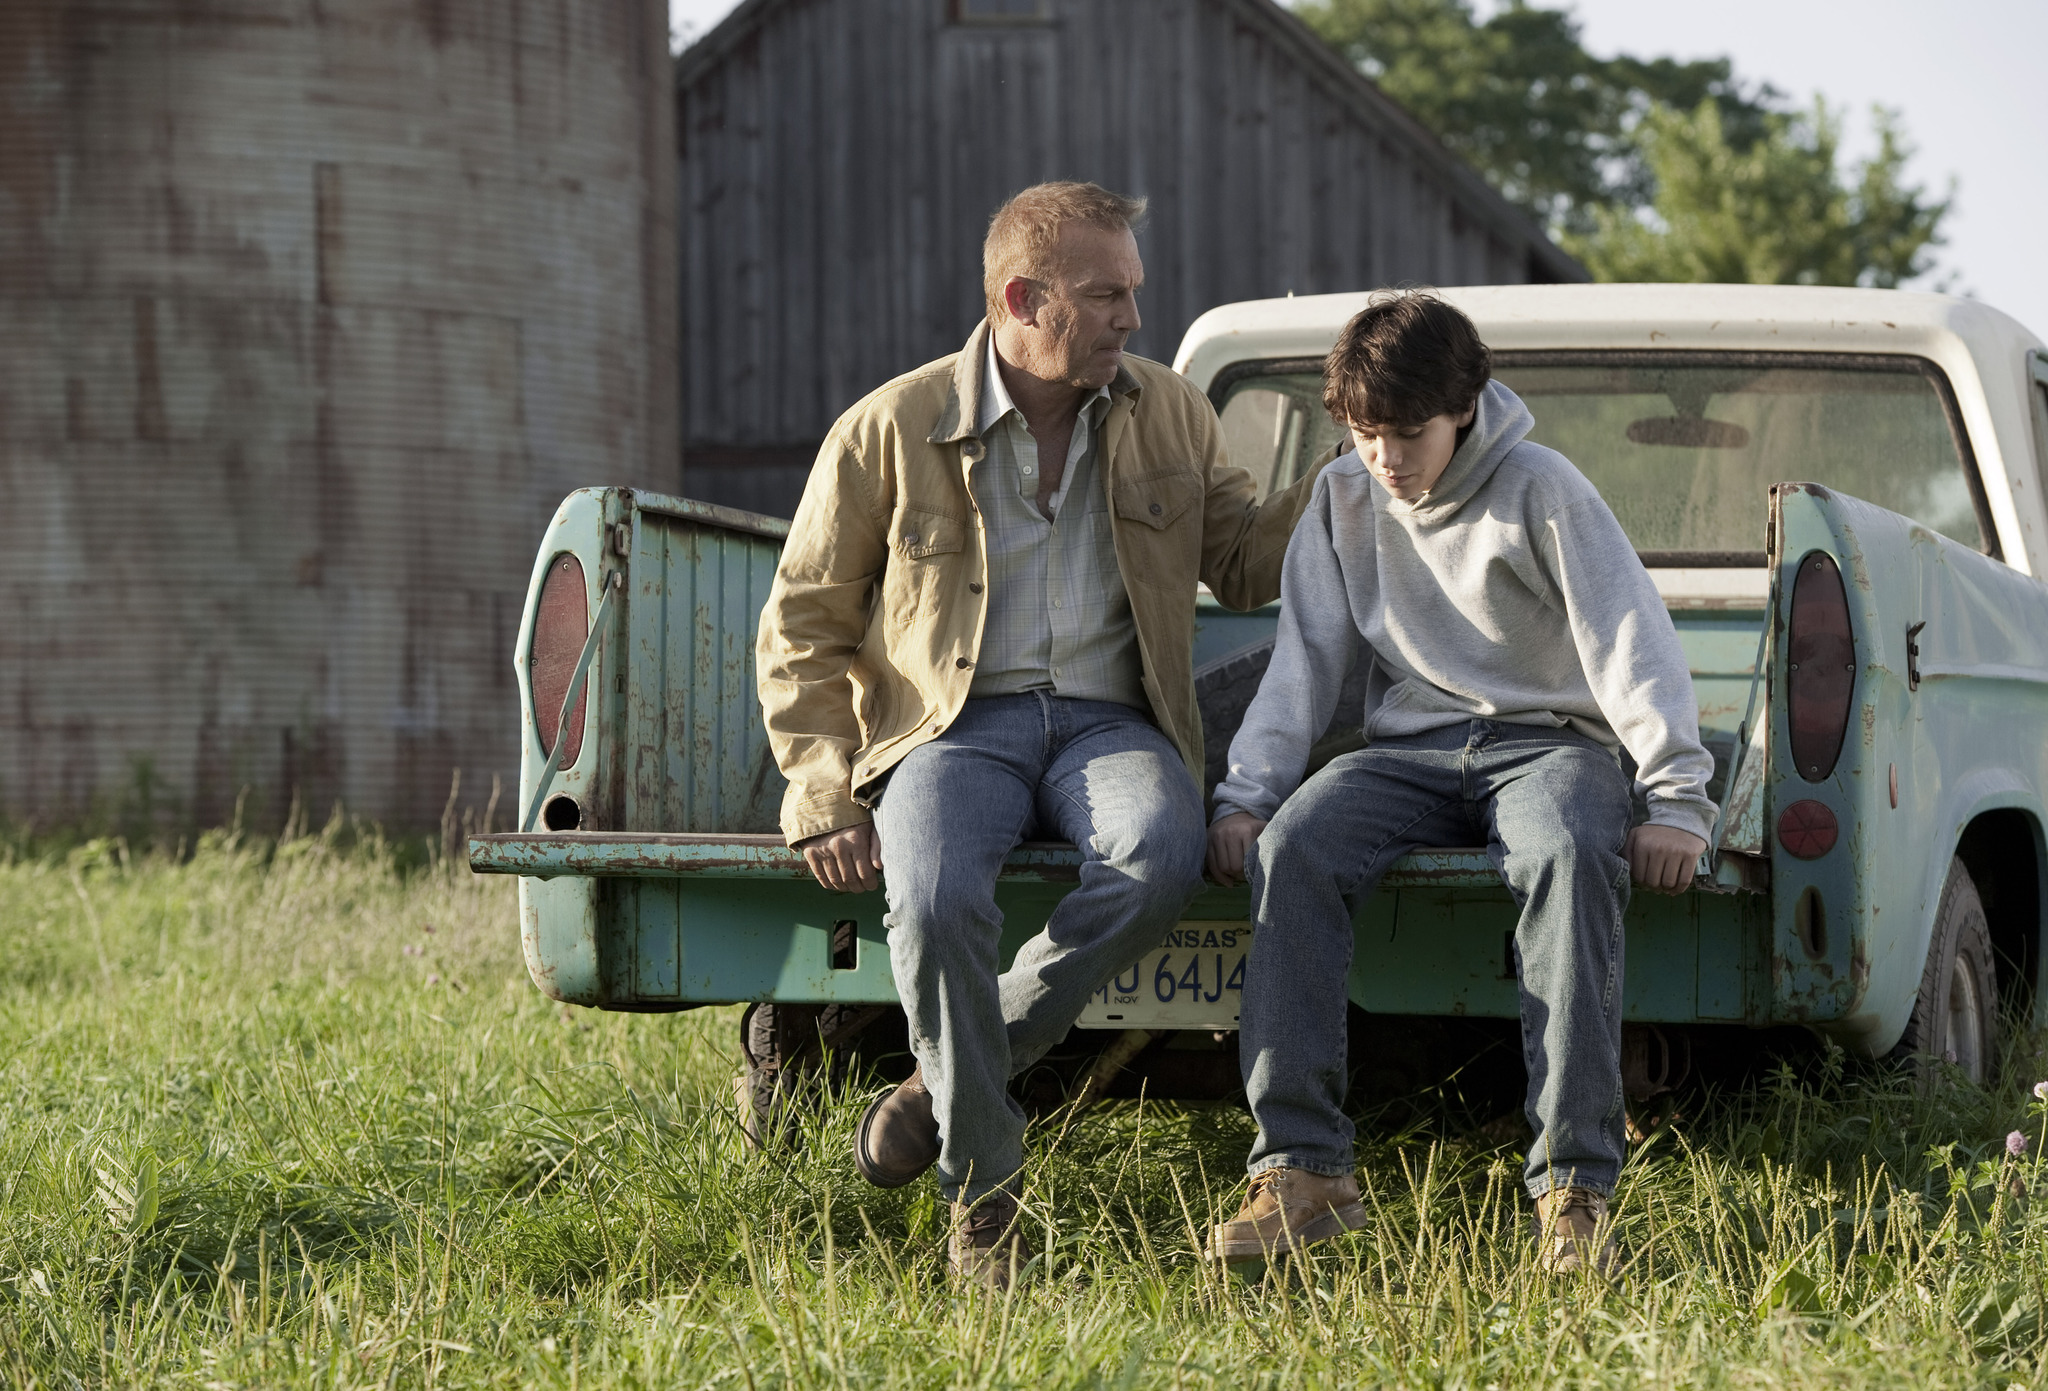 Still of Kevin Costner and Dylan Sprayberry in Zmogus is plieno (2013)